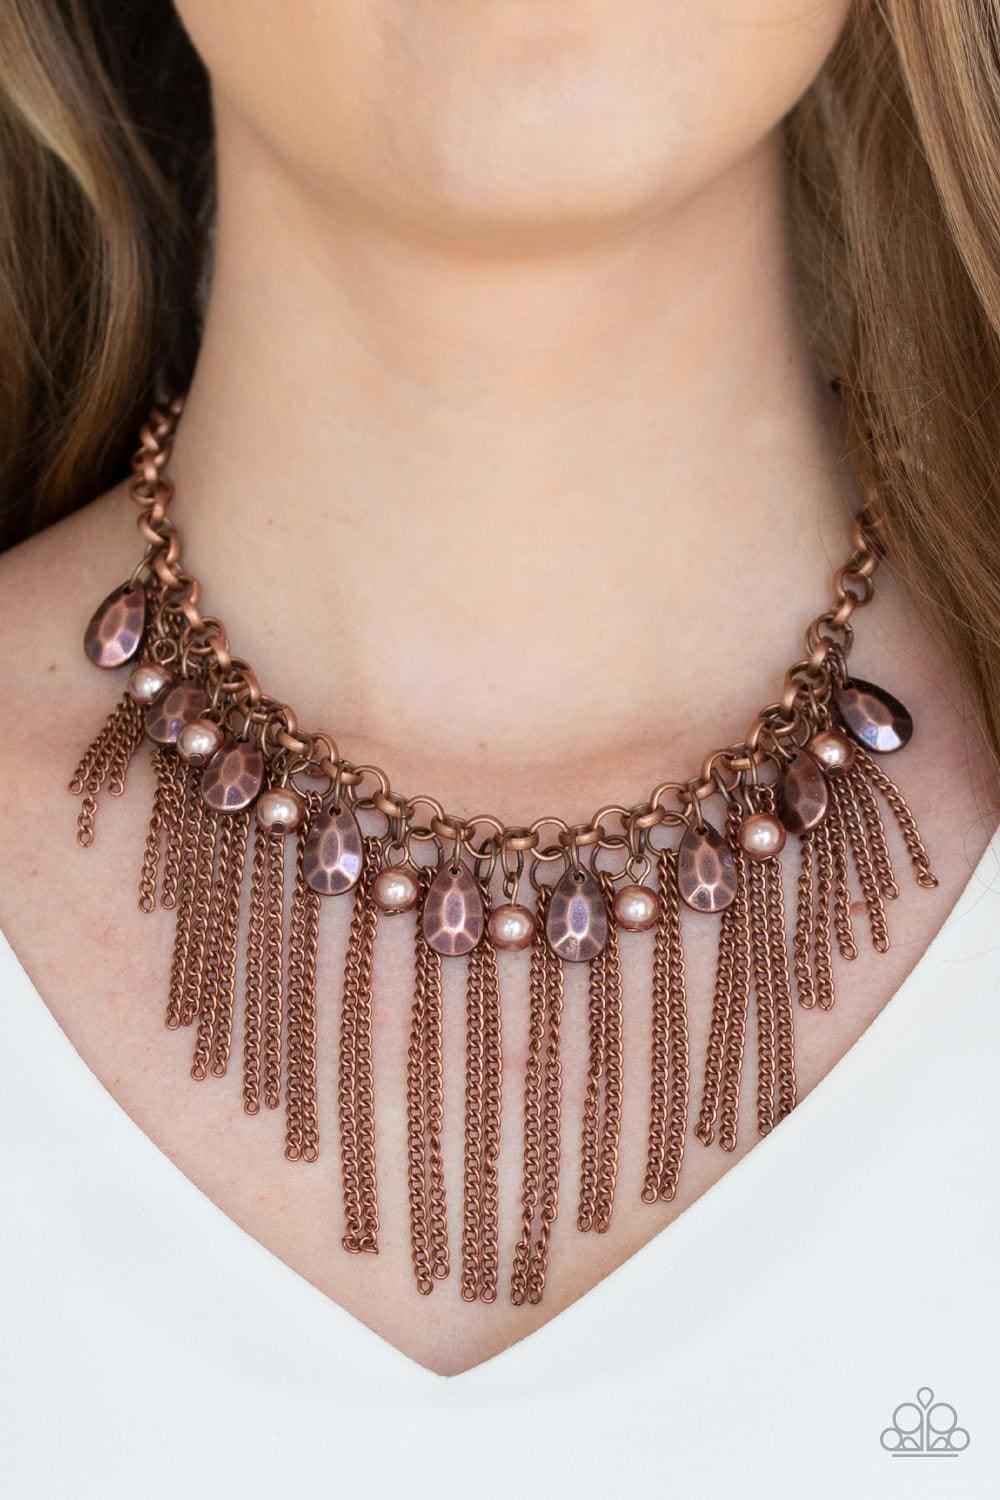 Paparazzi Accessories - Industrial Intensity - Copper Necklace - Bling by JessieK